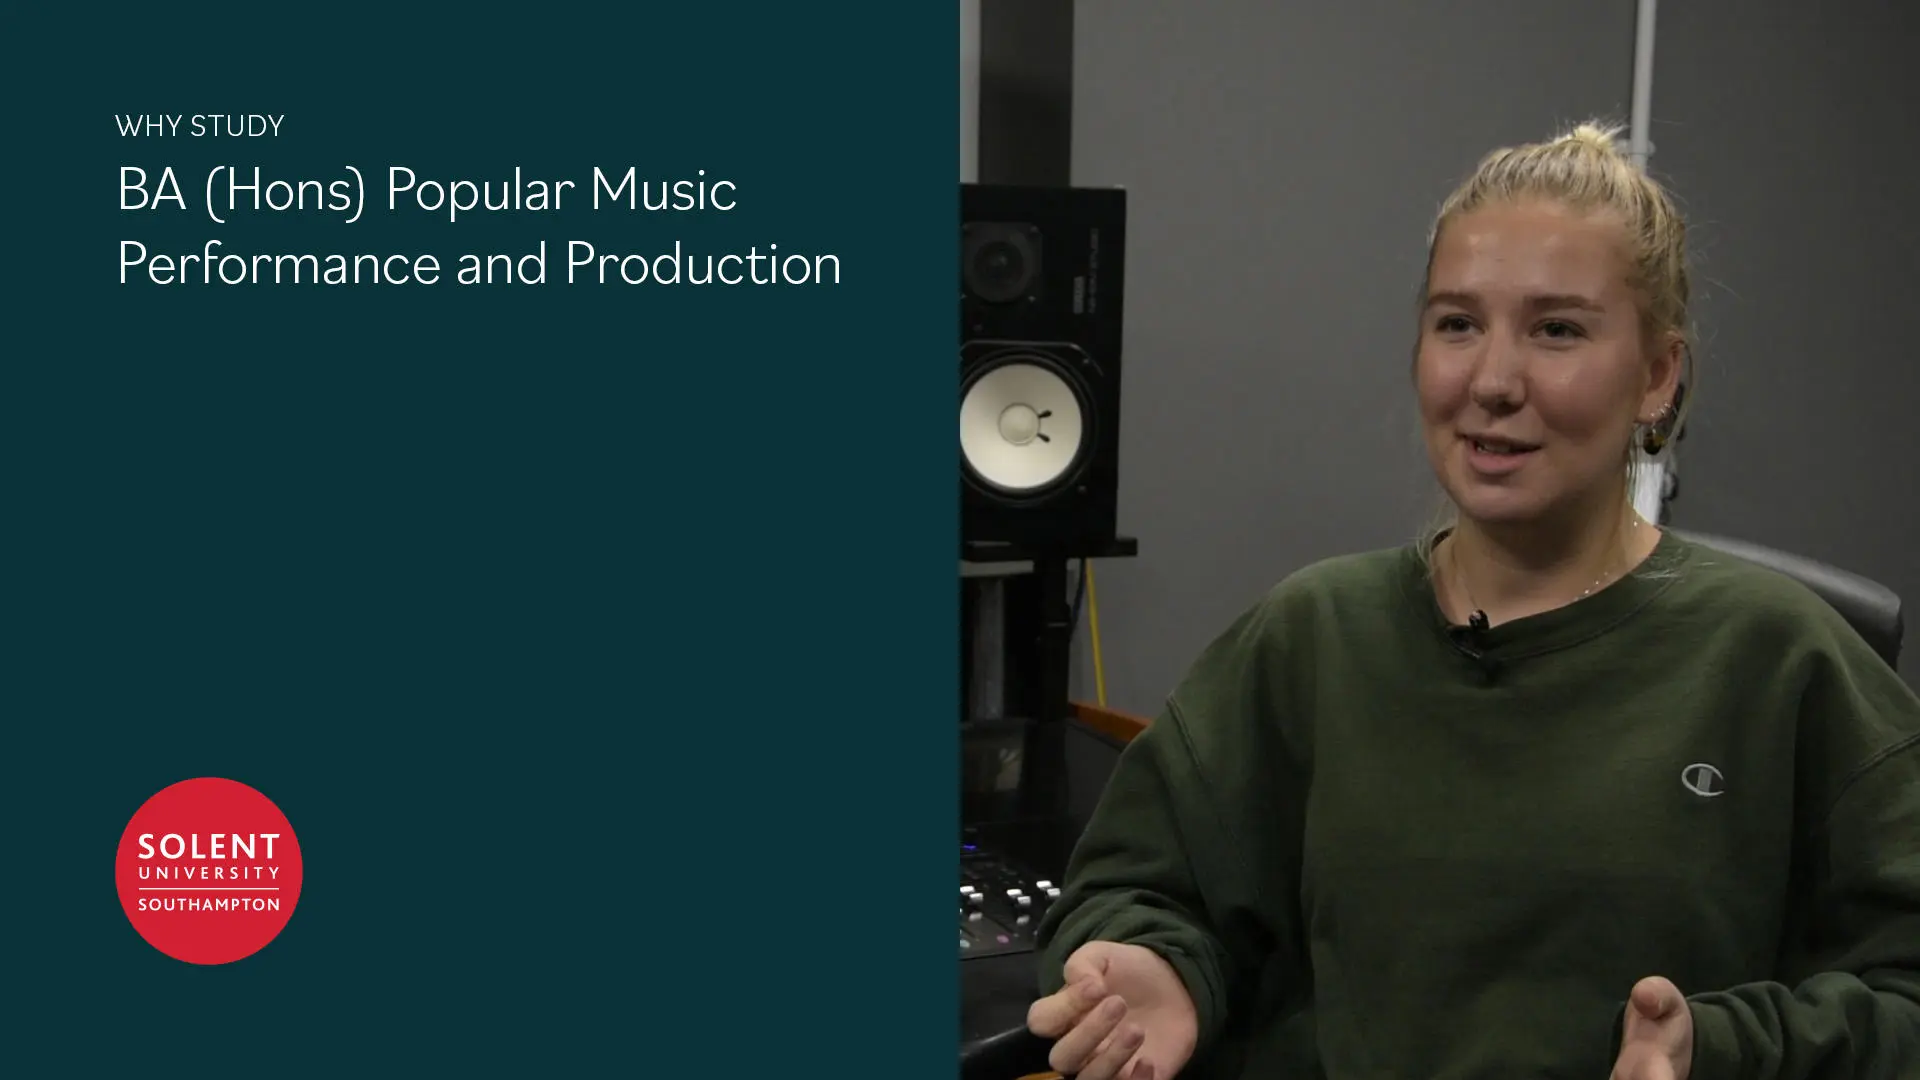 Image reads Why study BA (Hons) Popular Music Performance and Production